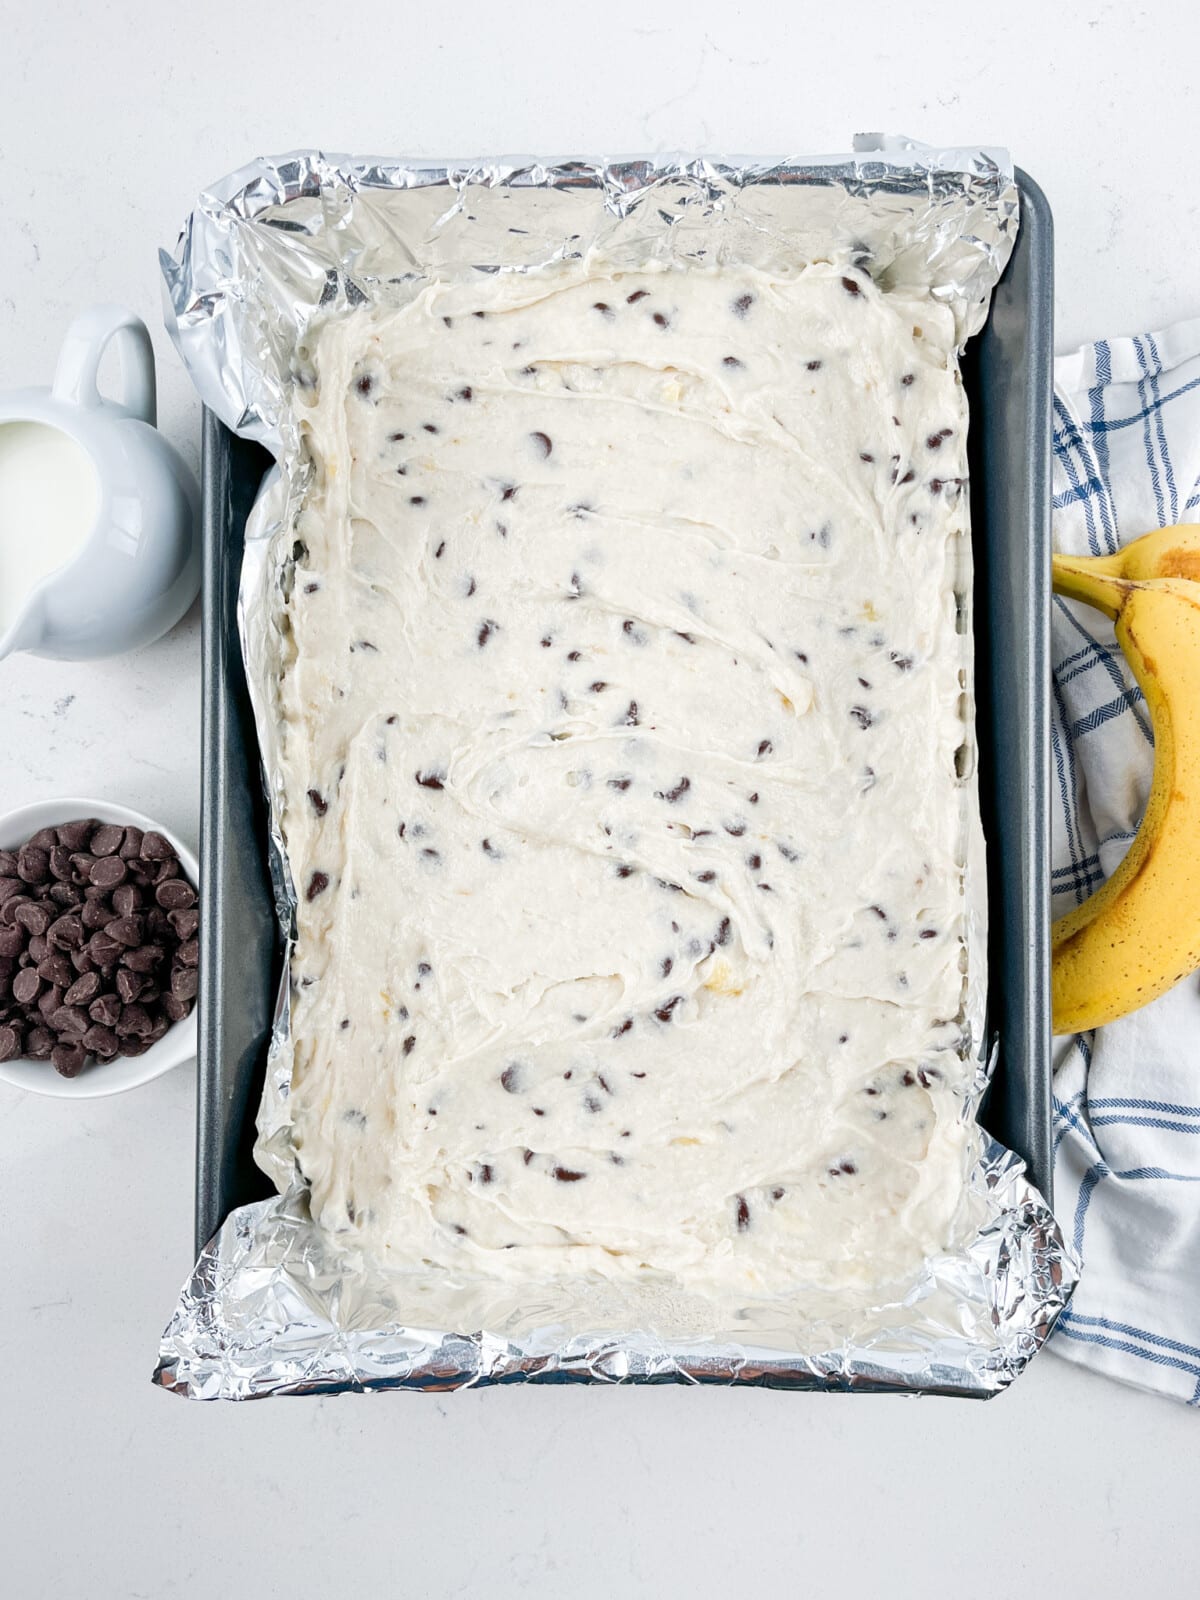 banana bar dough with chocolate chips in pan lined with foil.